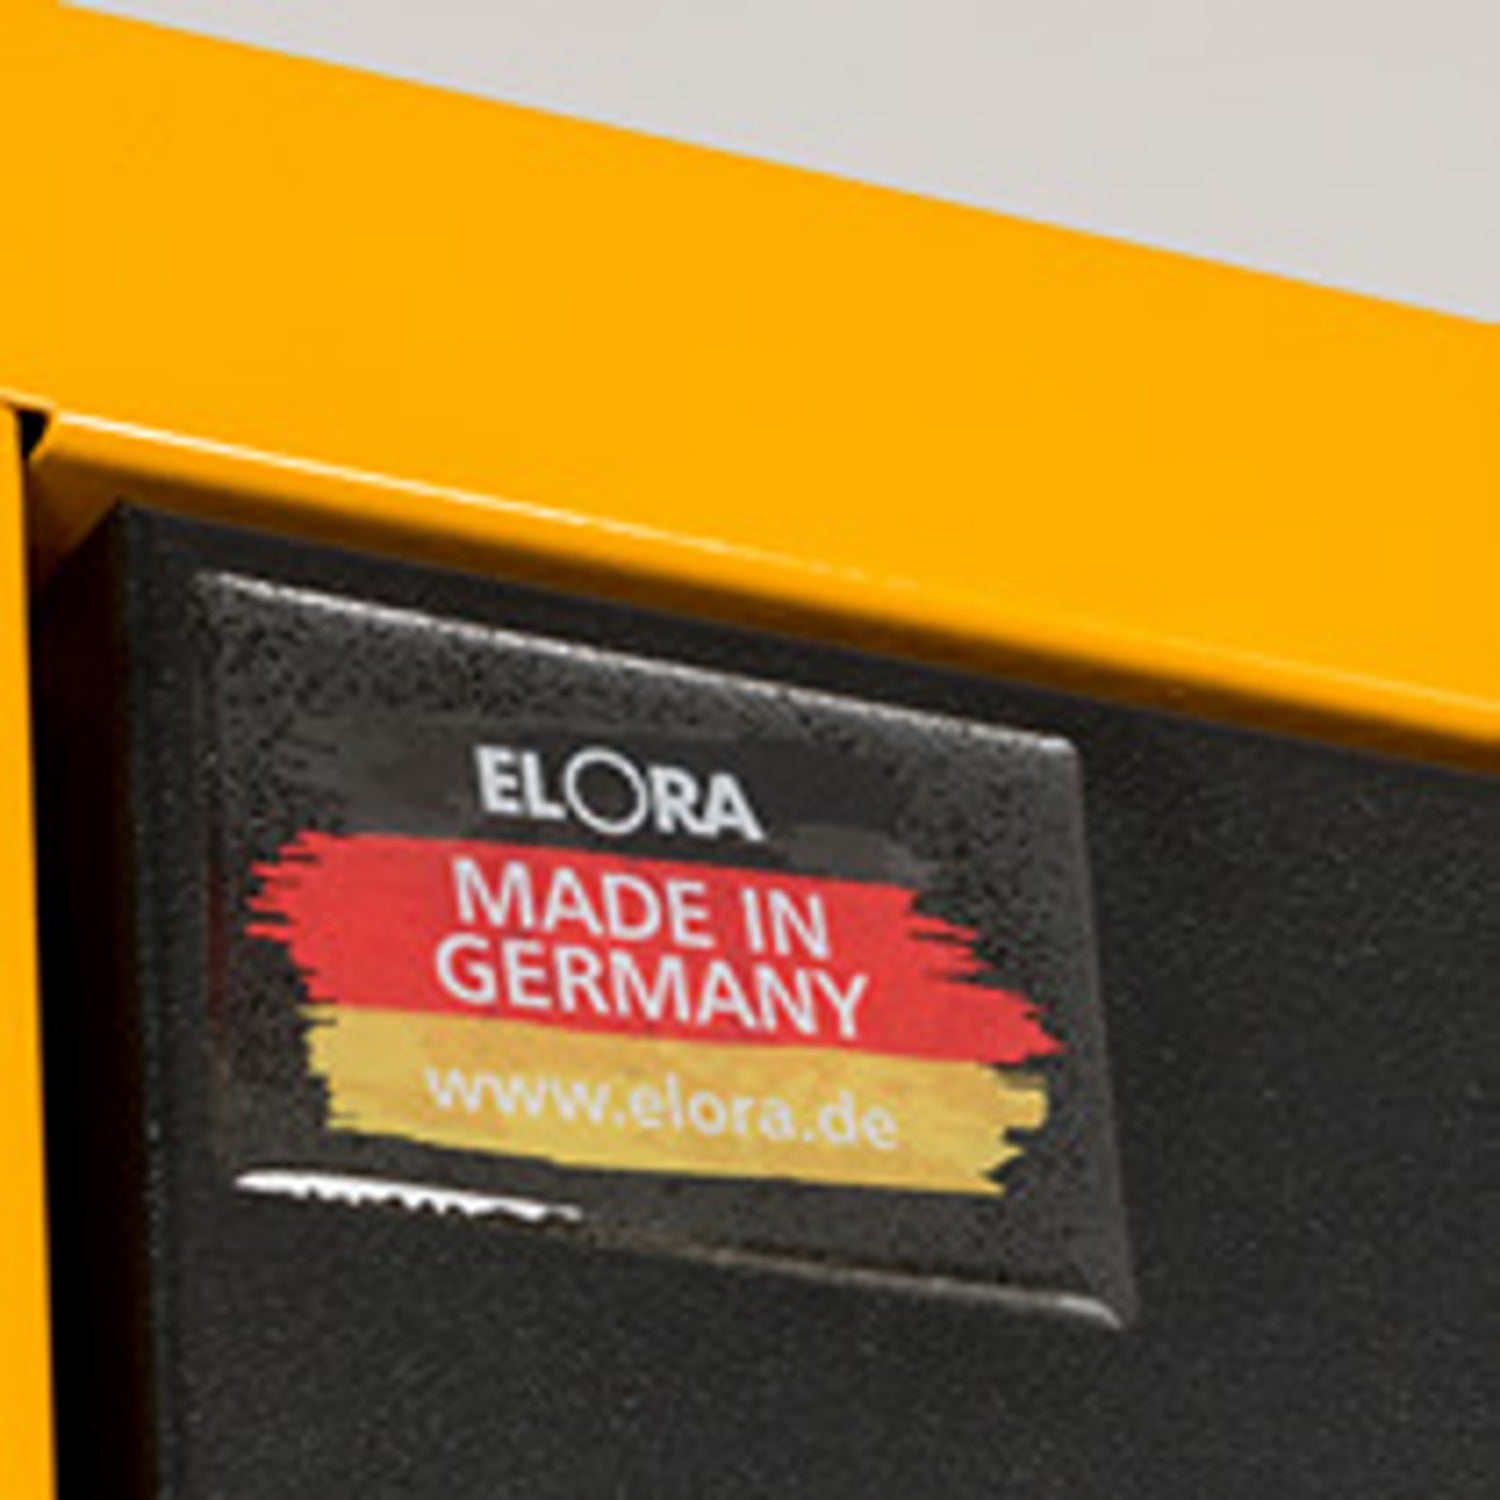 ELORA 1220-L8 Roller Tool Cabinet Super Caddy (ELORA Tools) - Premium Roller Tool Cabinet from ELORA - Shop now at Yew Aik.